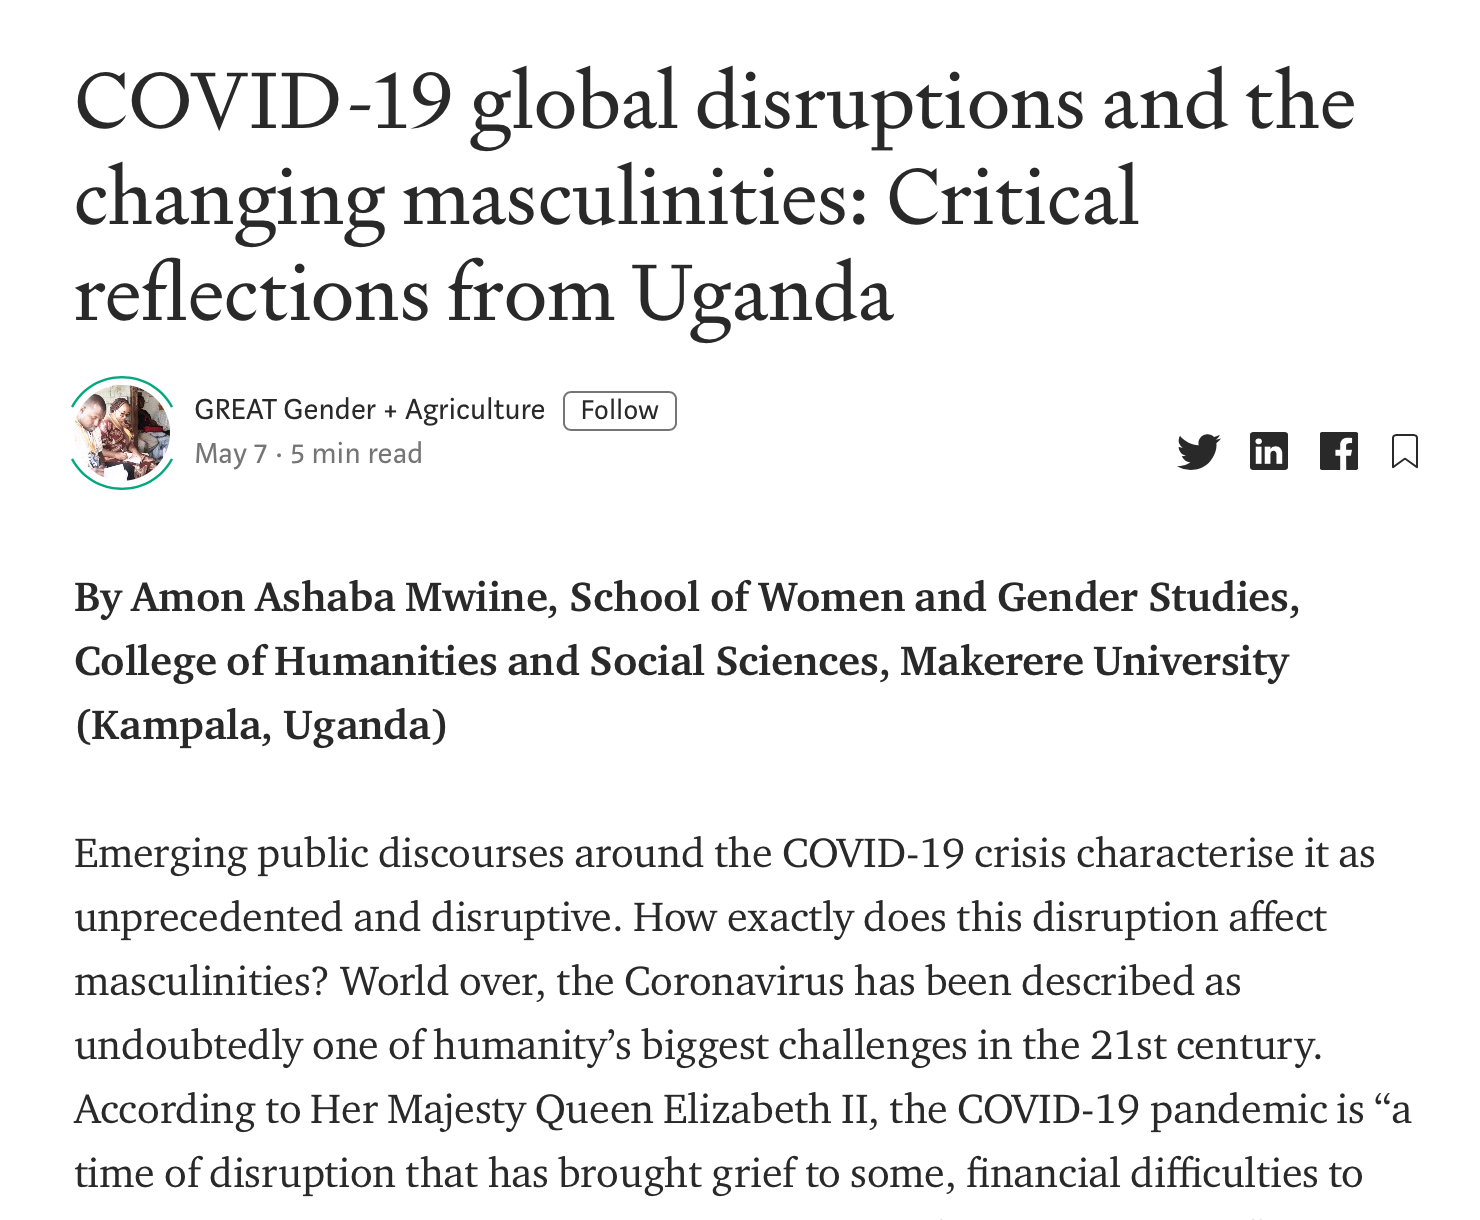 COVID-19 global disruptions and the changing masculinities: Critical reflections from Uganda